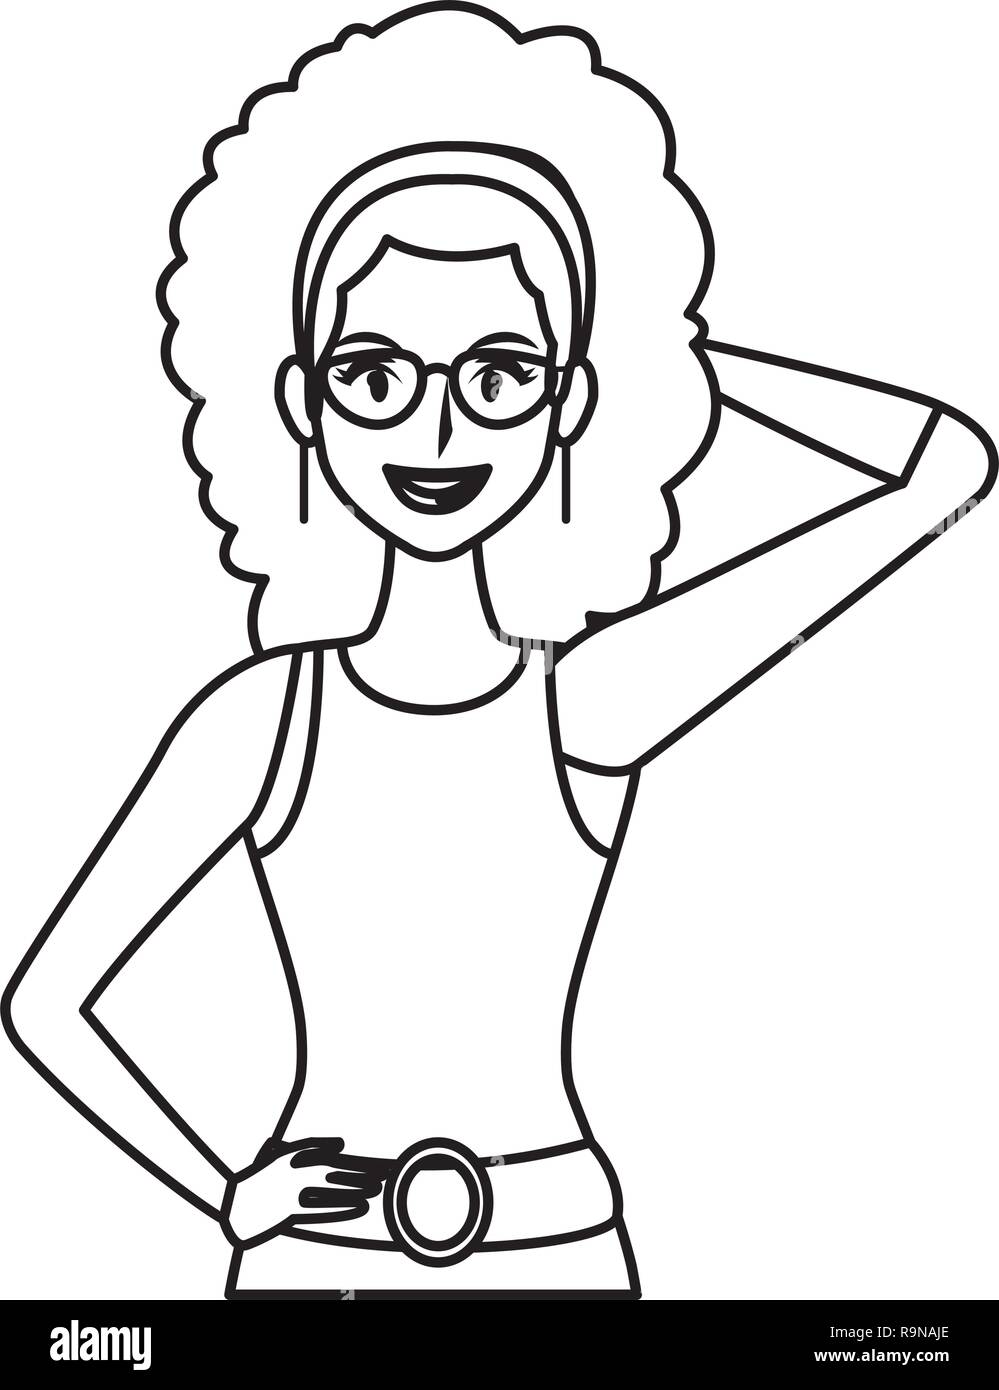 Disco woman cartoon in black and white Stock Vector